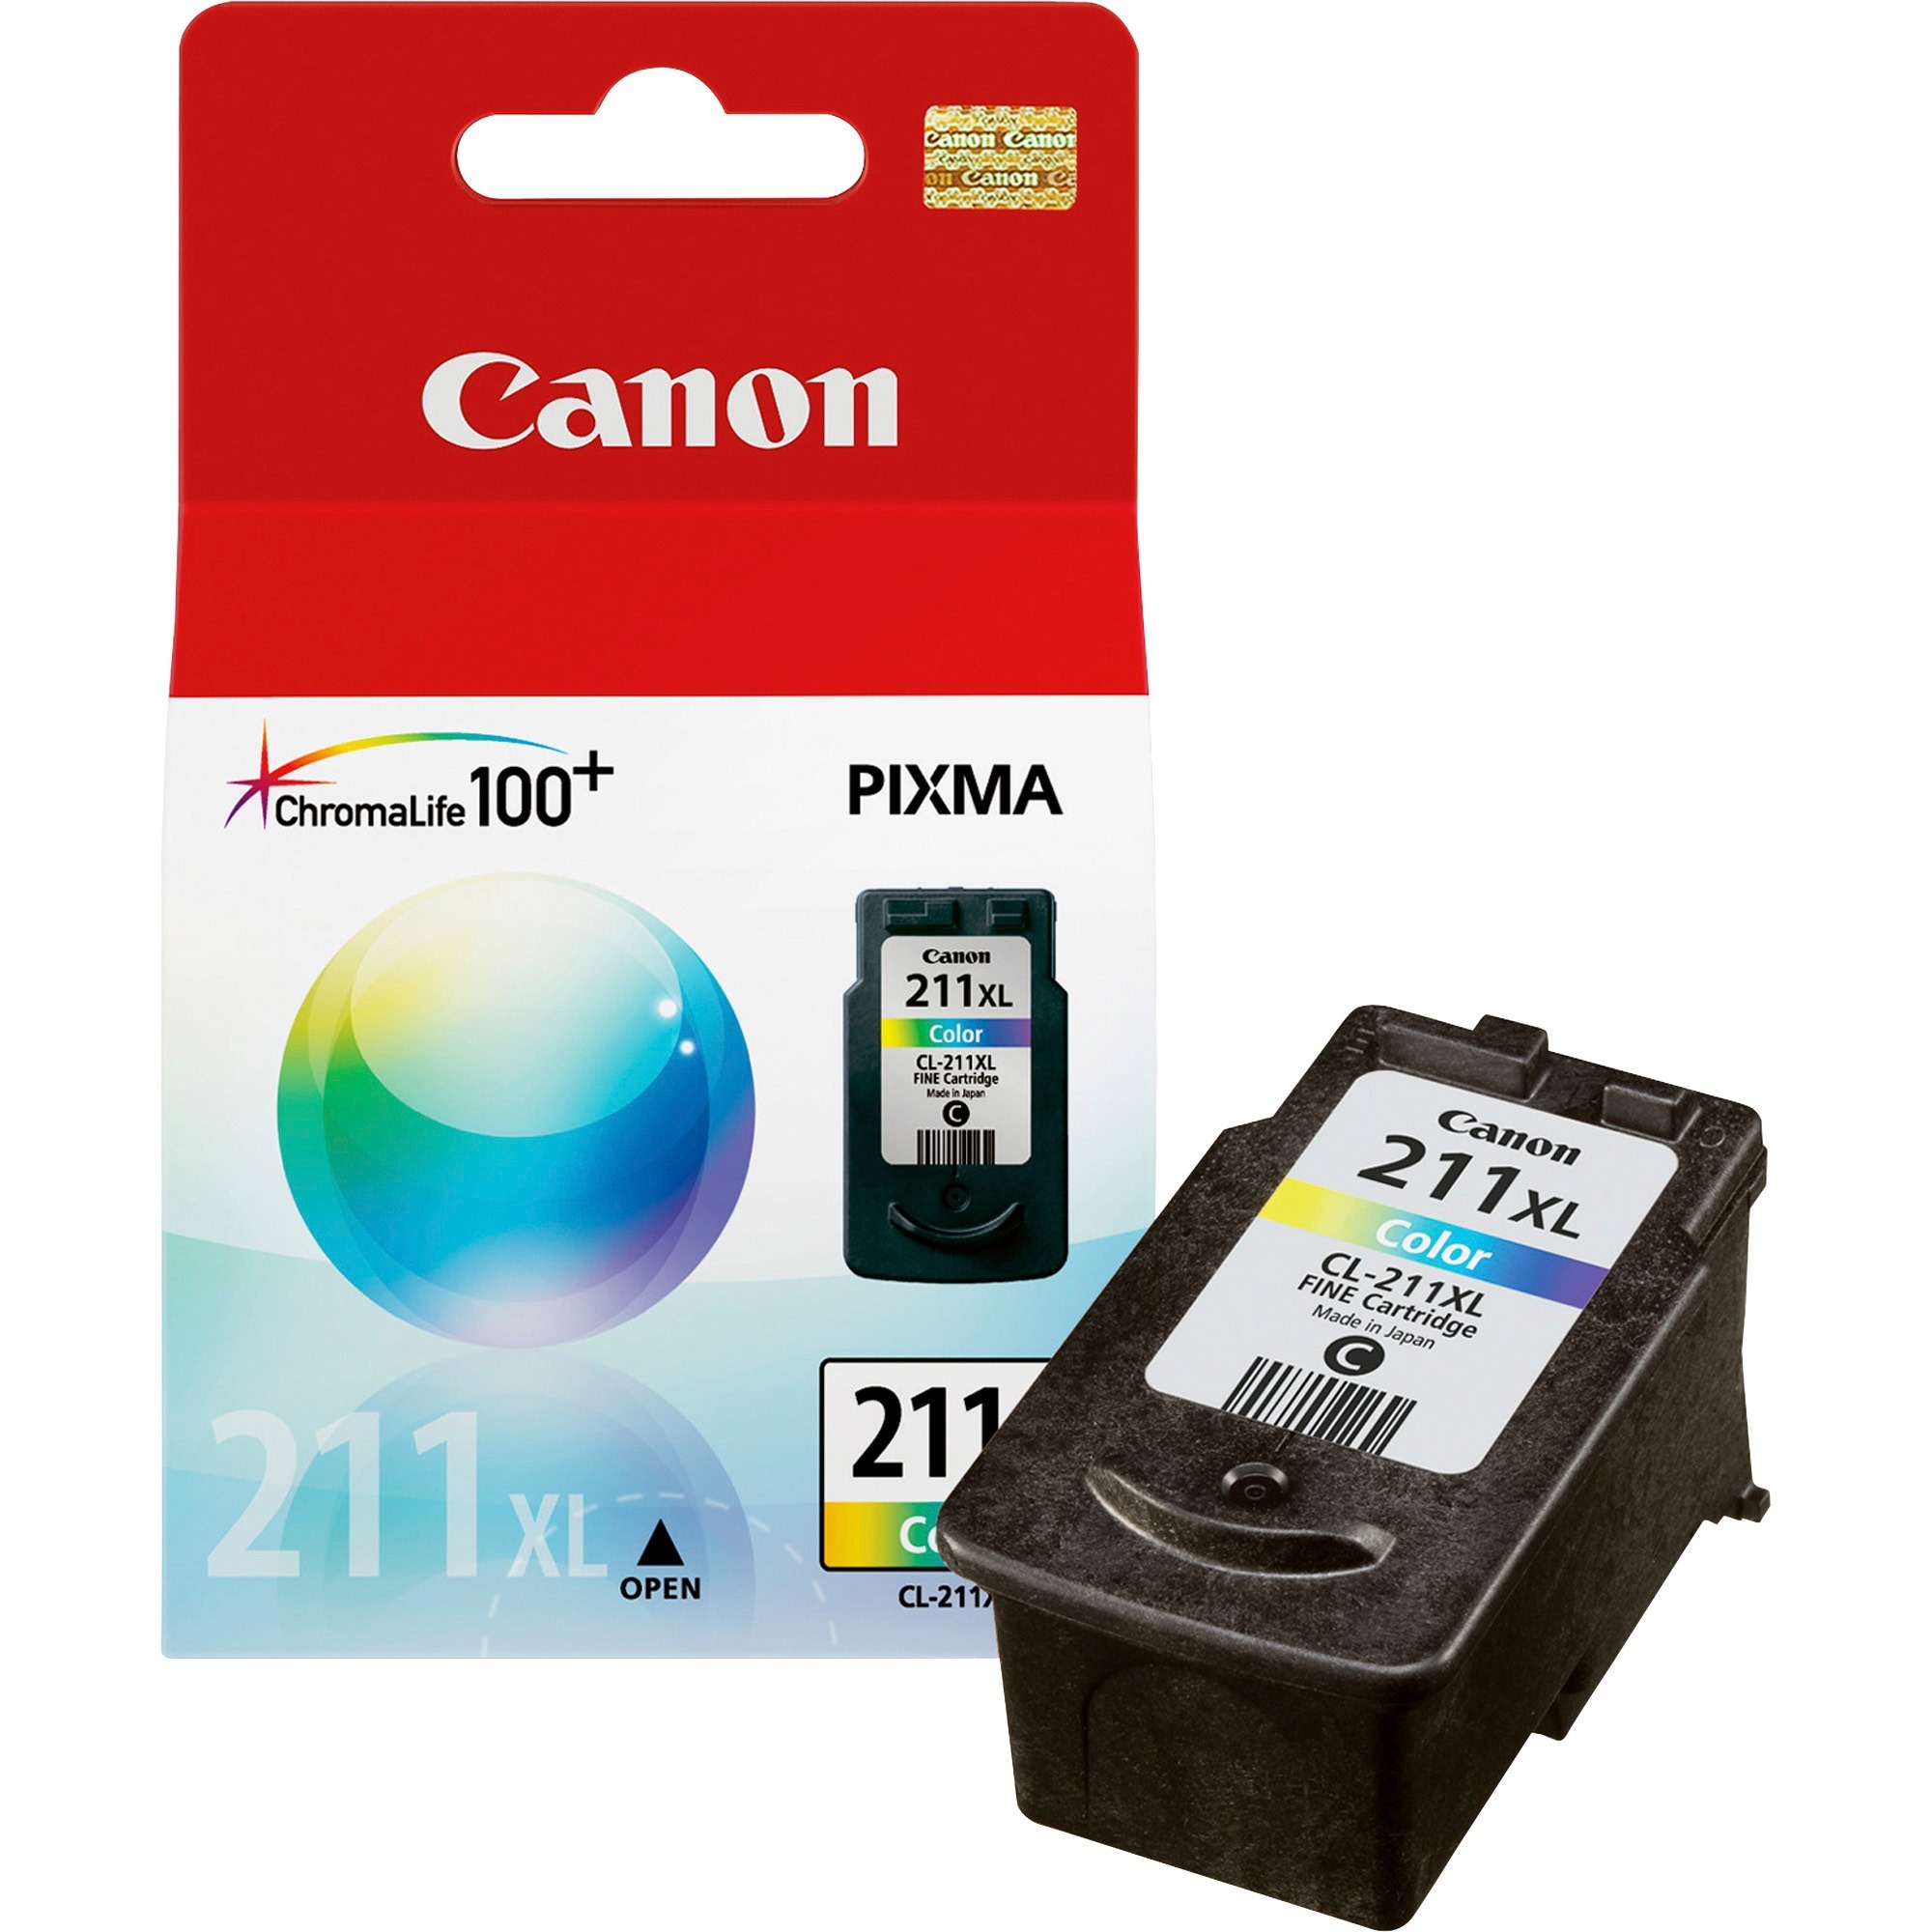 Canon 2975B001 Cl-211Xl High-Yield Ink Cartridge Tri-color - image 1 of 4